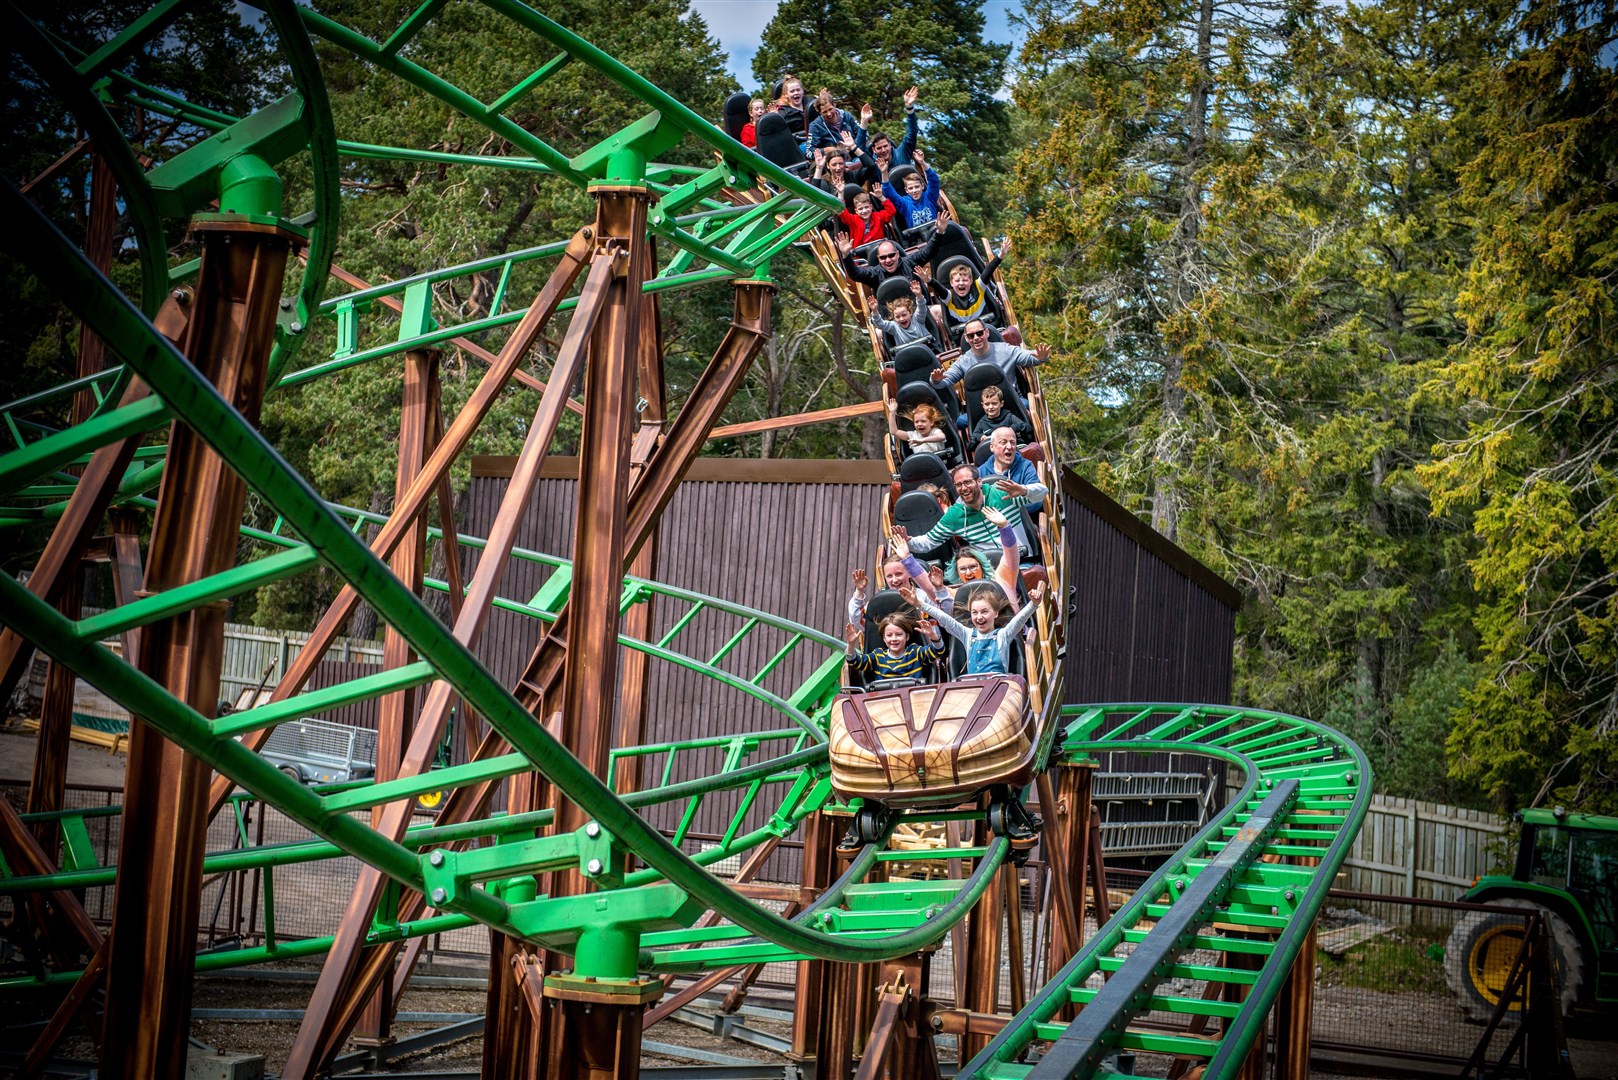 The Runaway Timber Train was one of Landmark's most popular attractions.